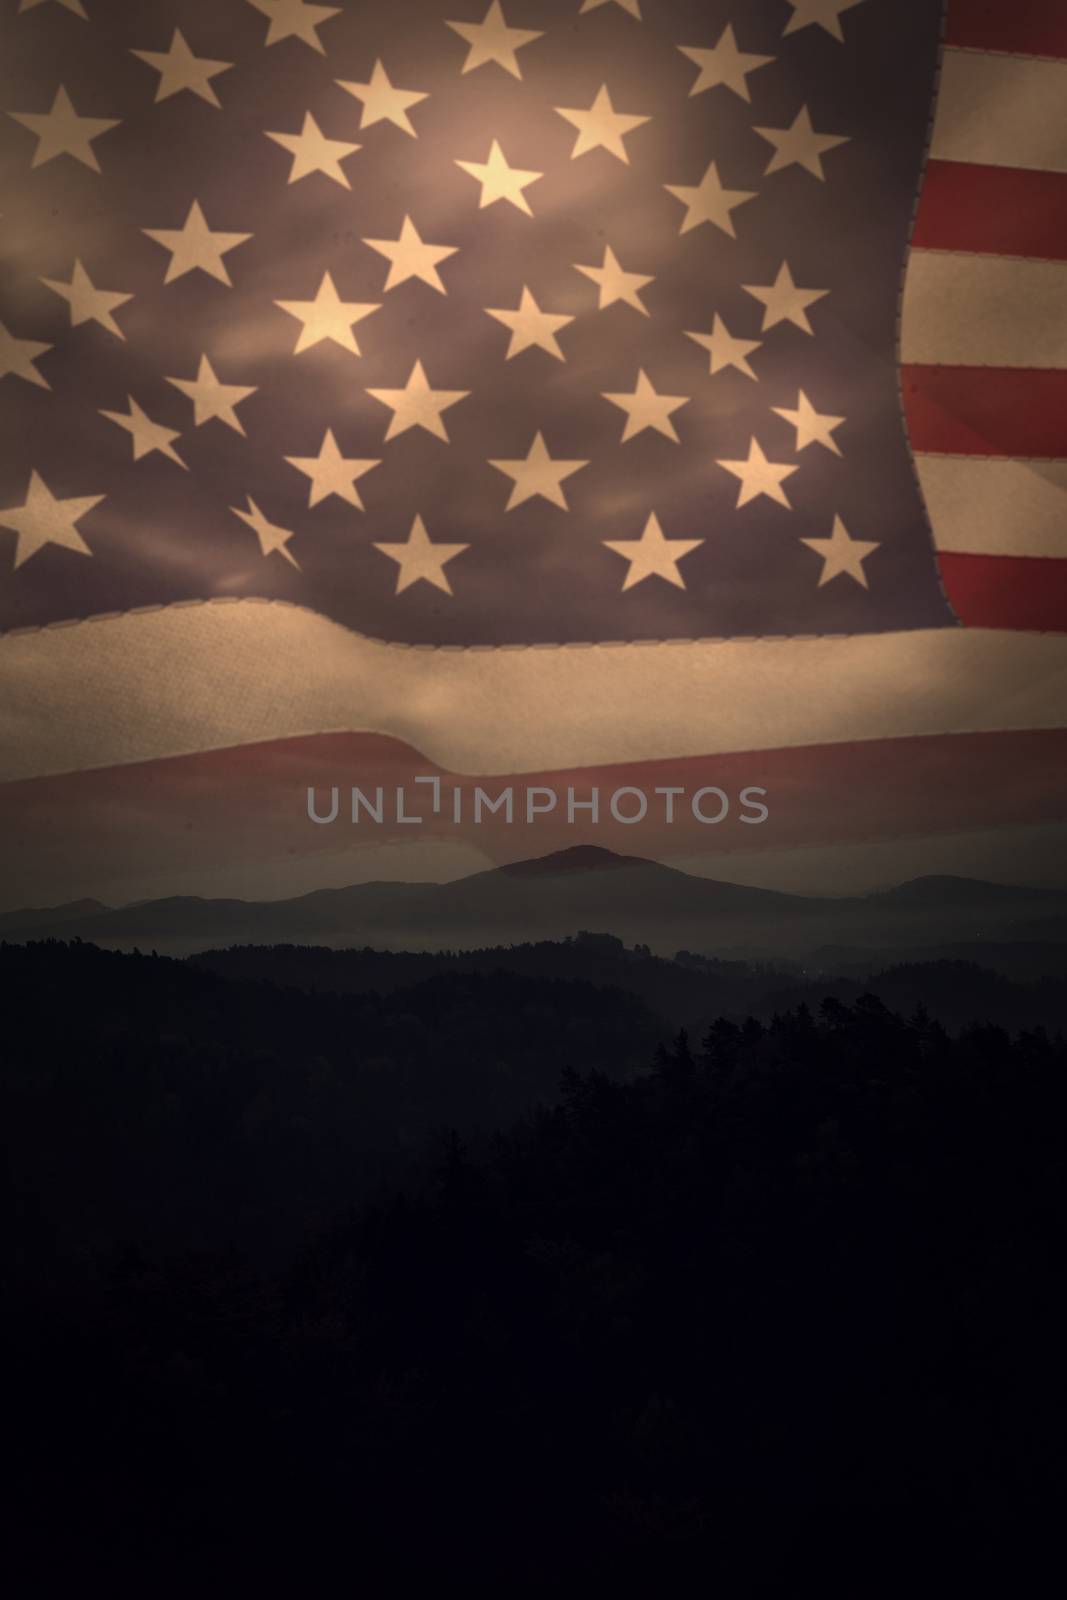 Composite image of united states of america flag by Wavebreakmedia